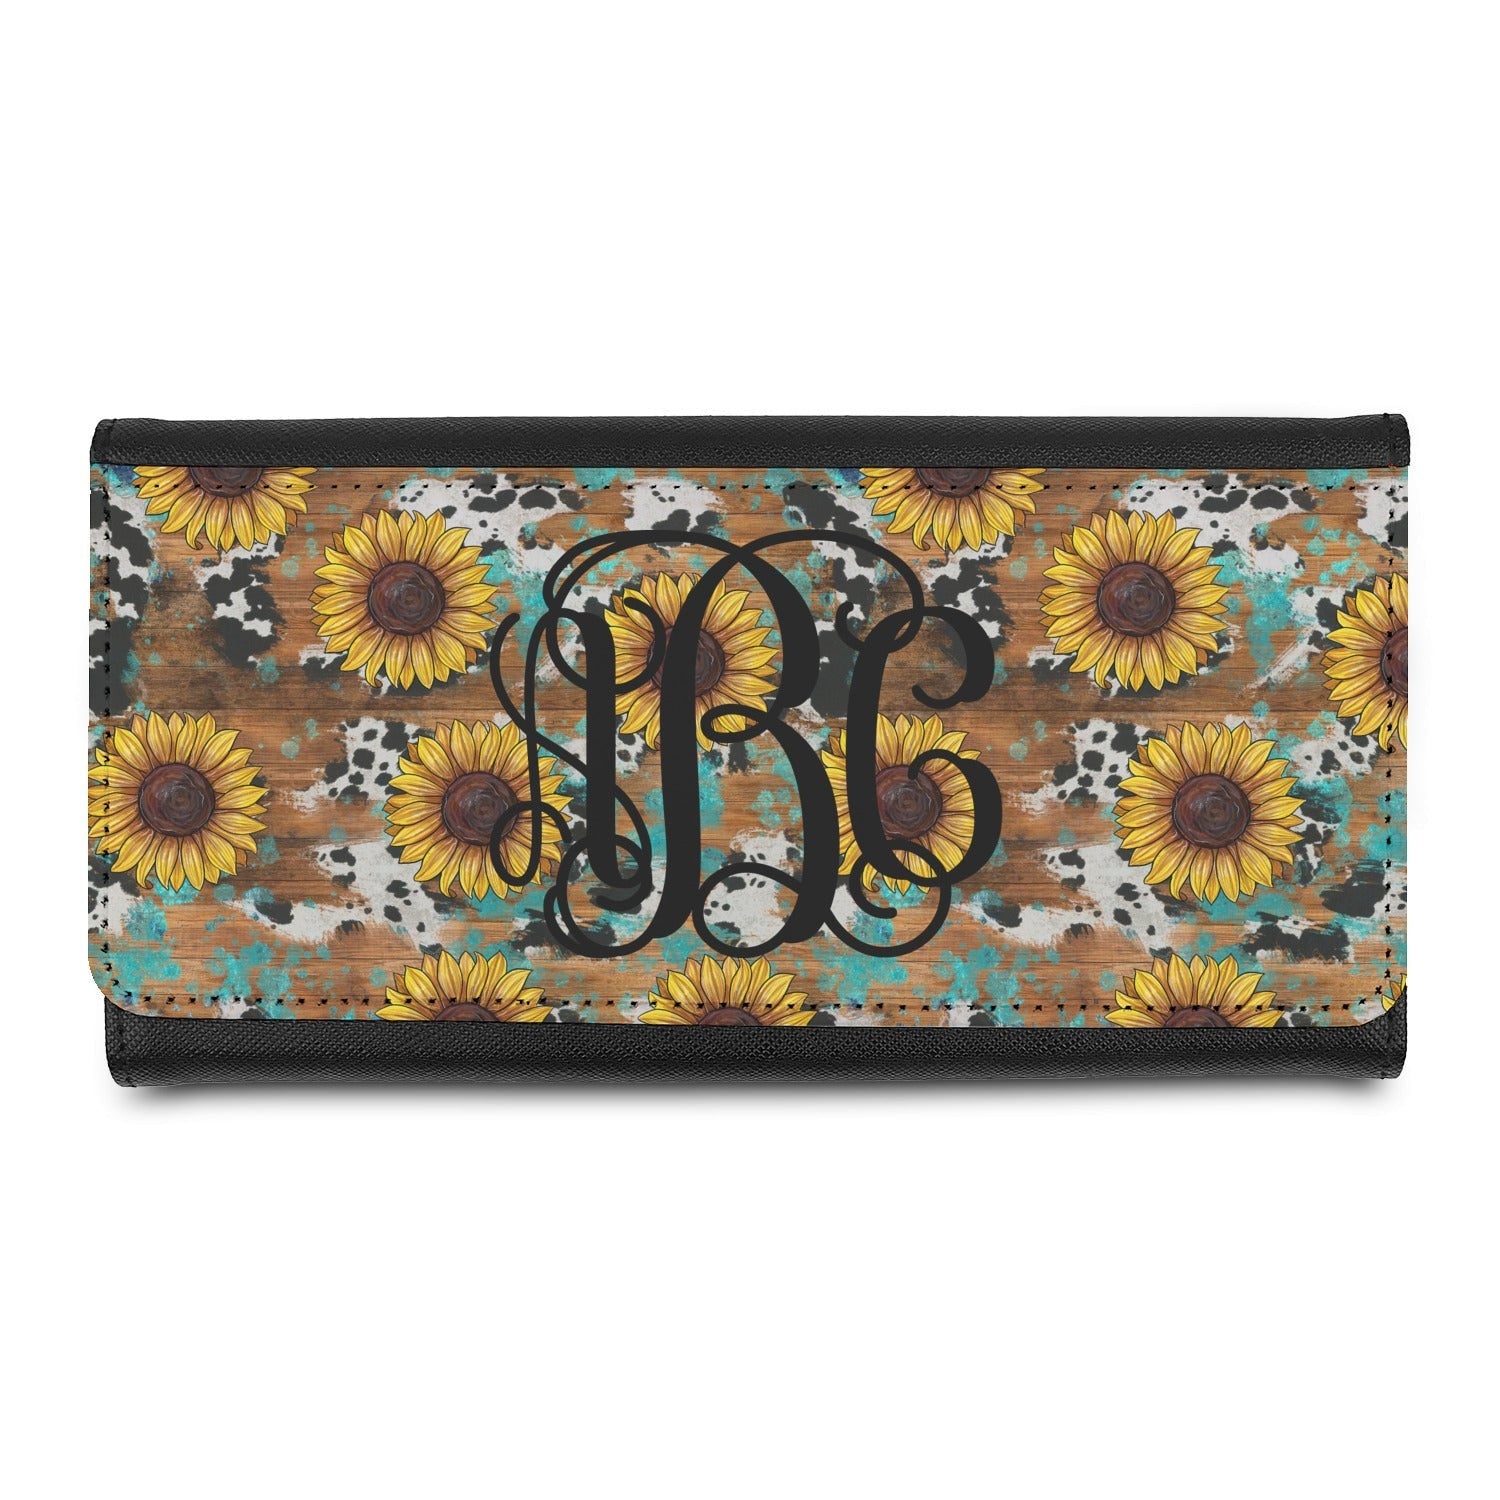 Western Sunflowers Print/Personalize It!/ Design Wallet